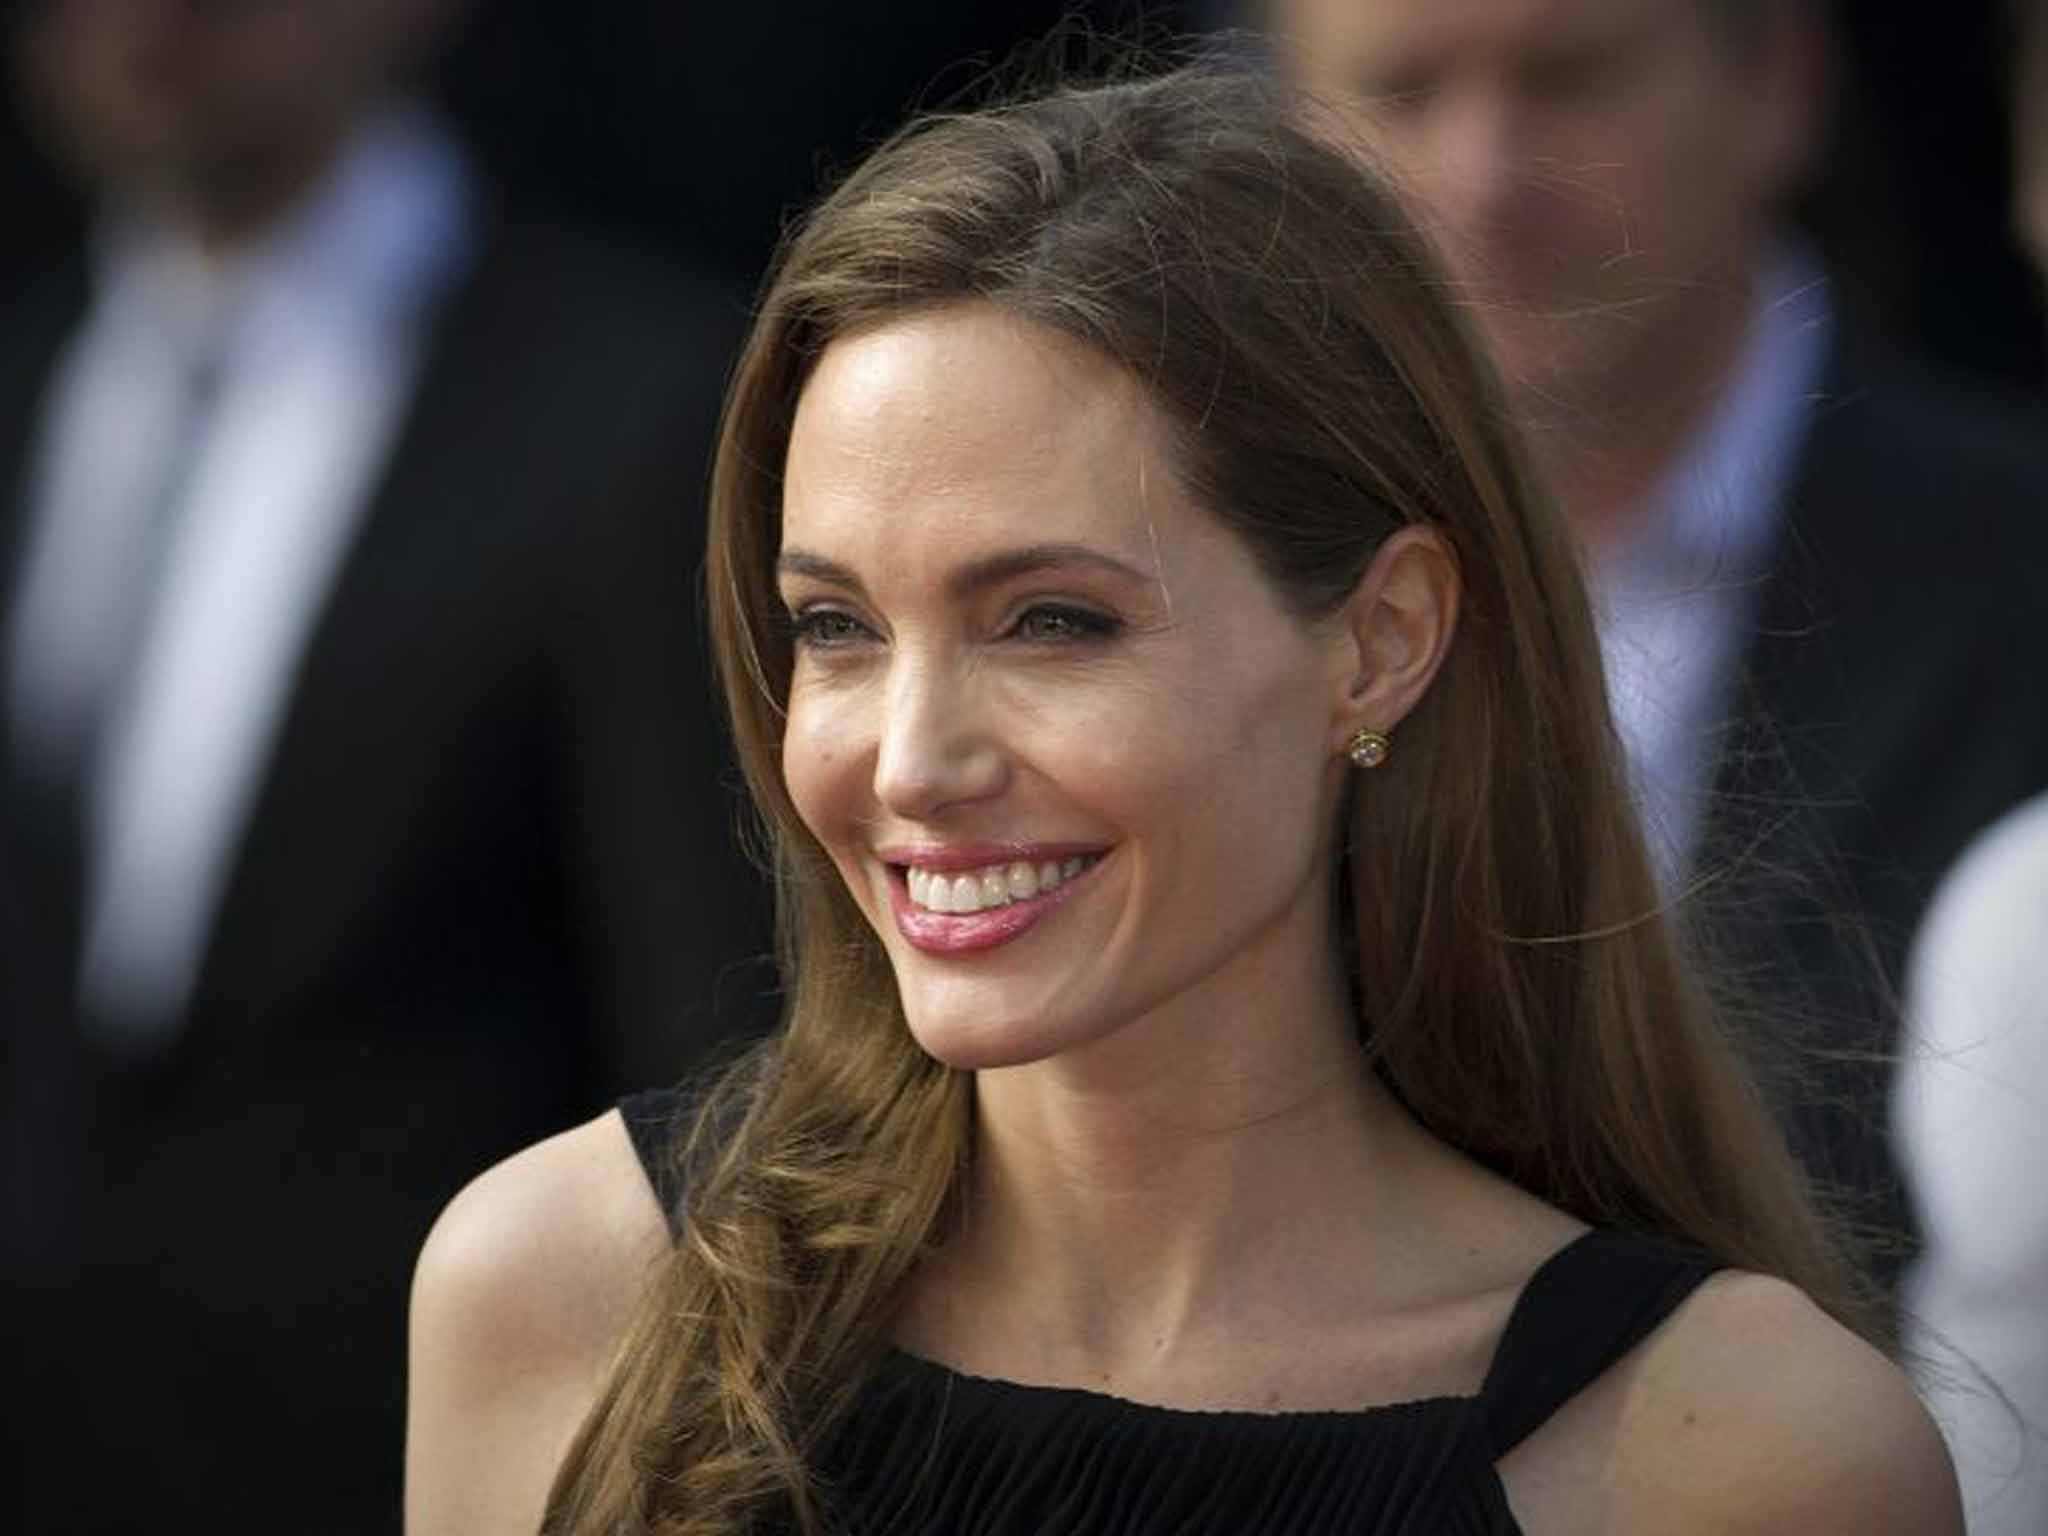 Angelina Jolie Real Sex - Angelina Jolie tells teens: 'Different is good' | The ...